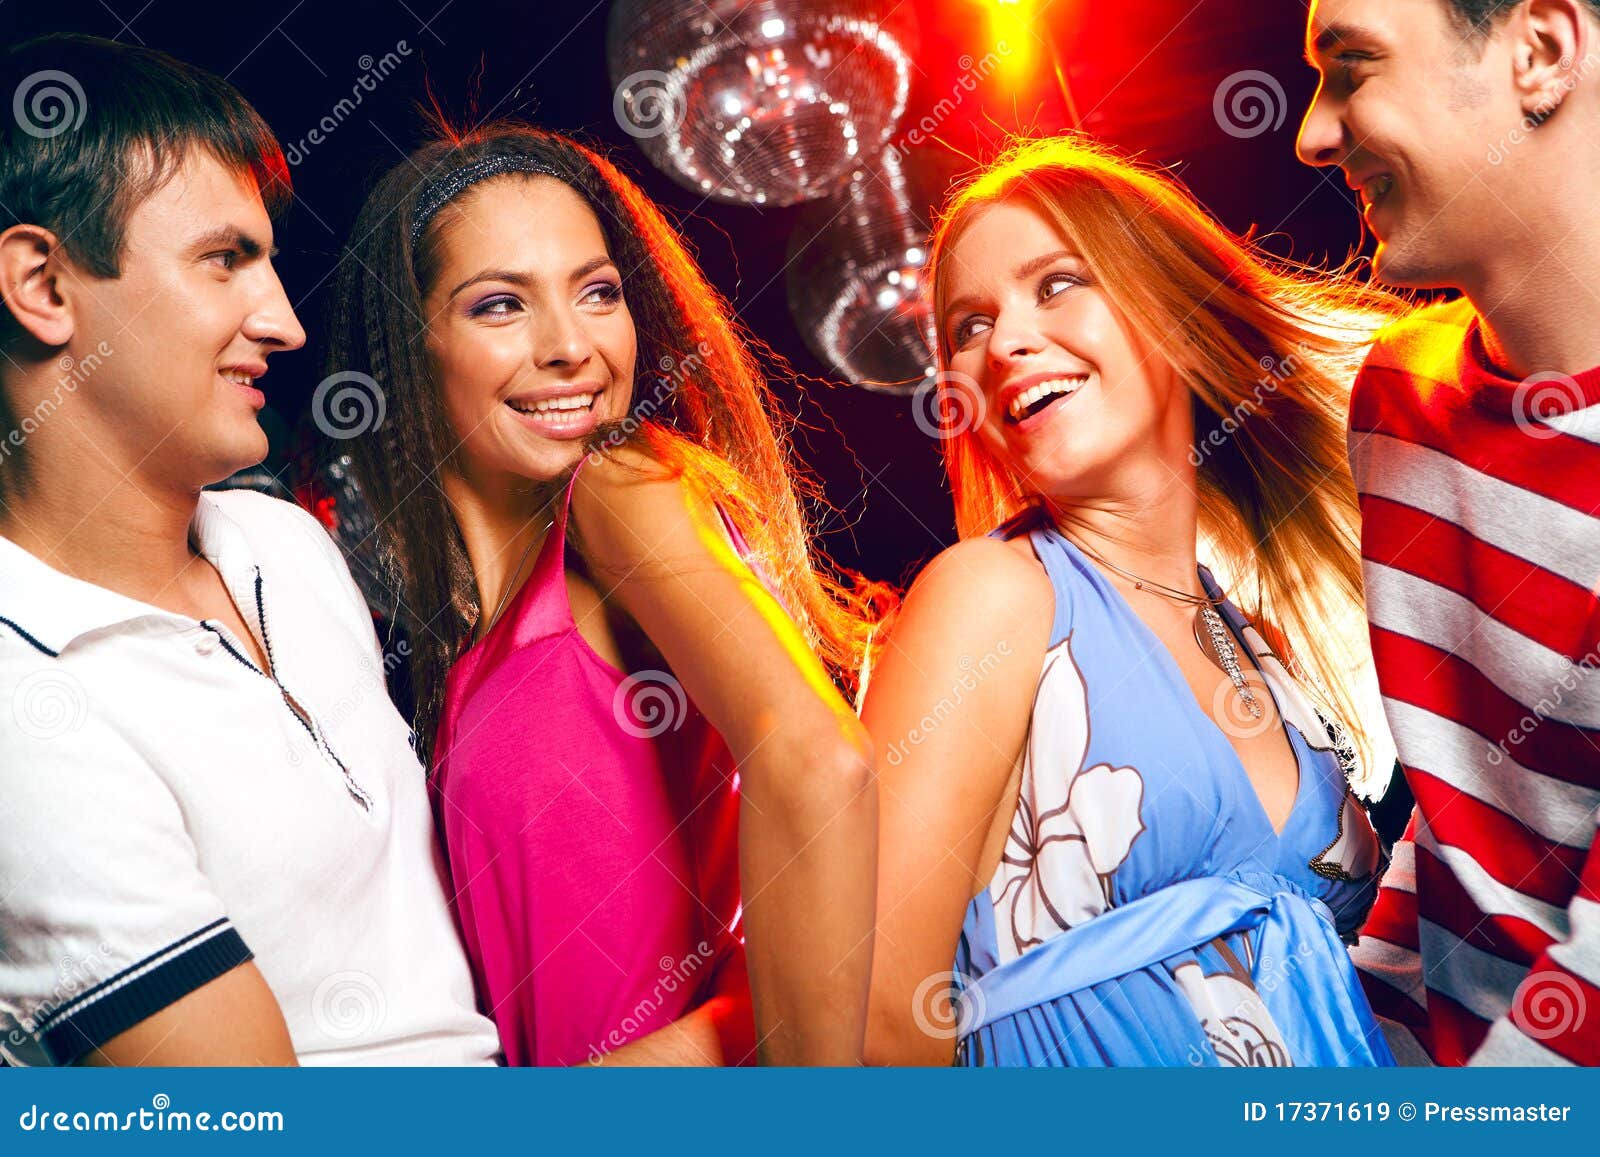 Clubbers stock image. Image of enjoyment, happy, cheerful - 17371619